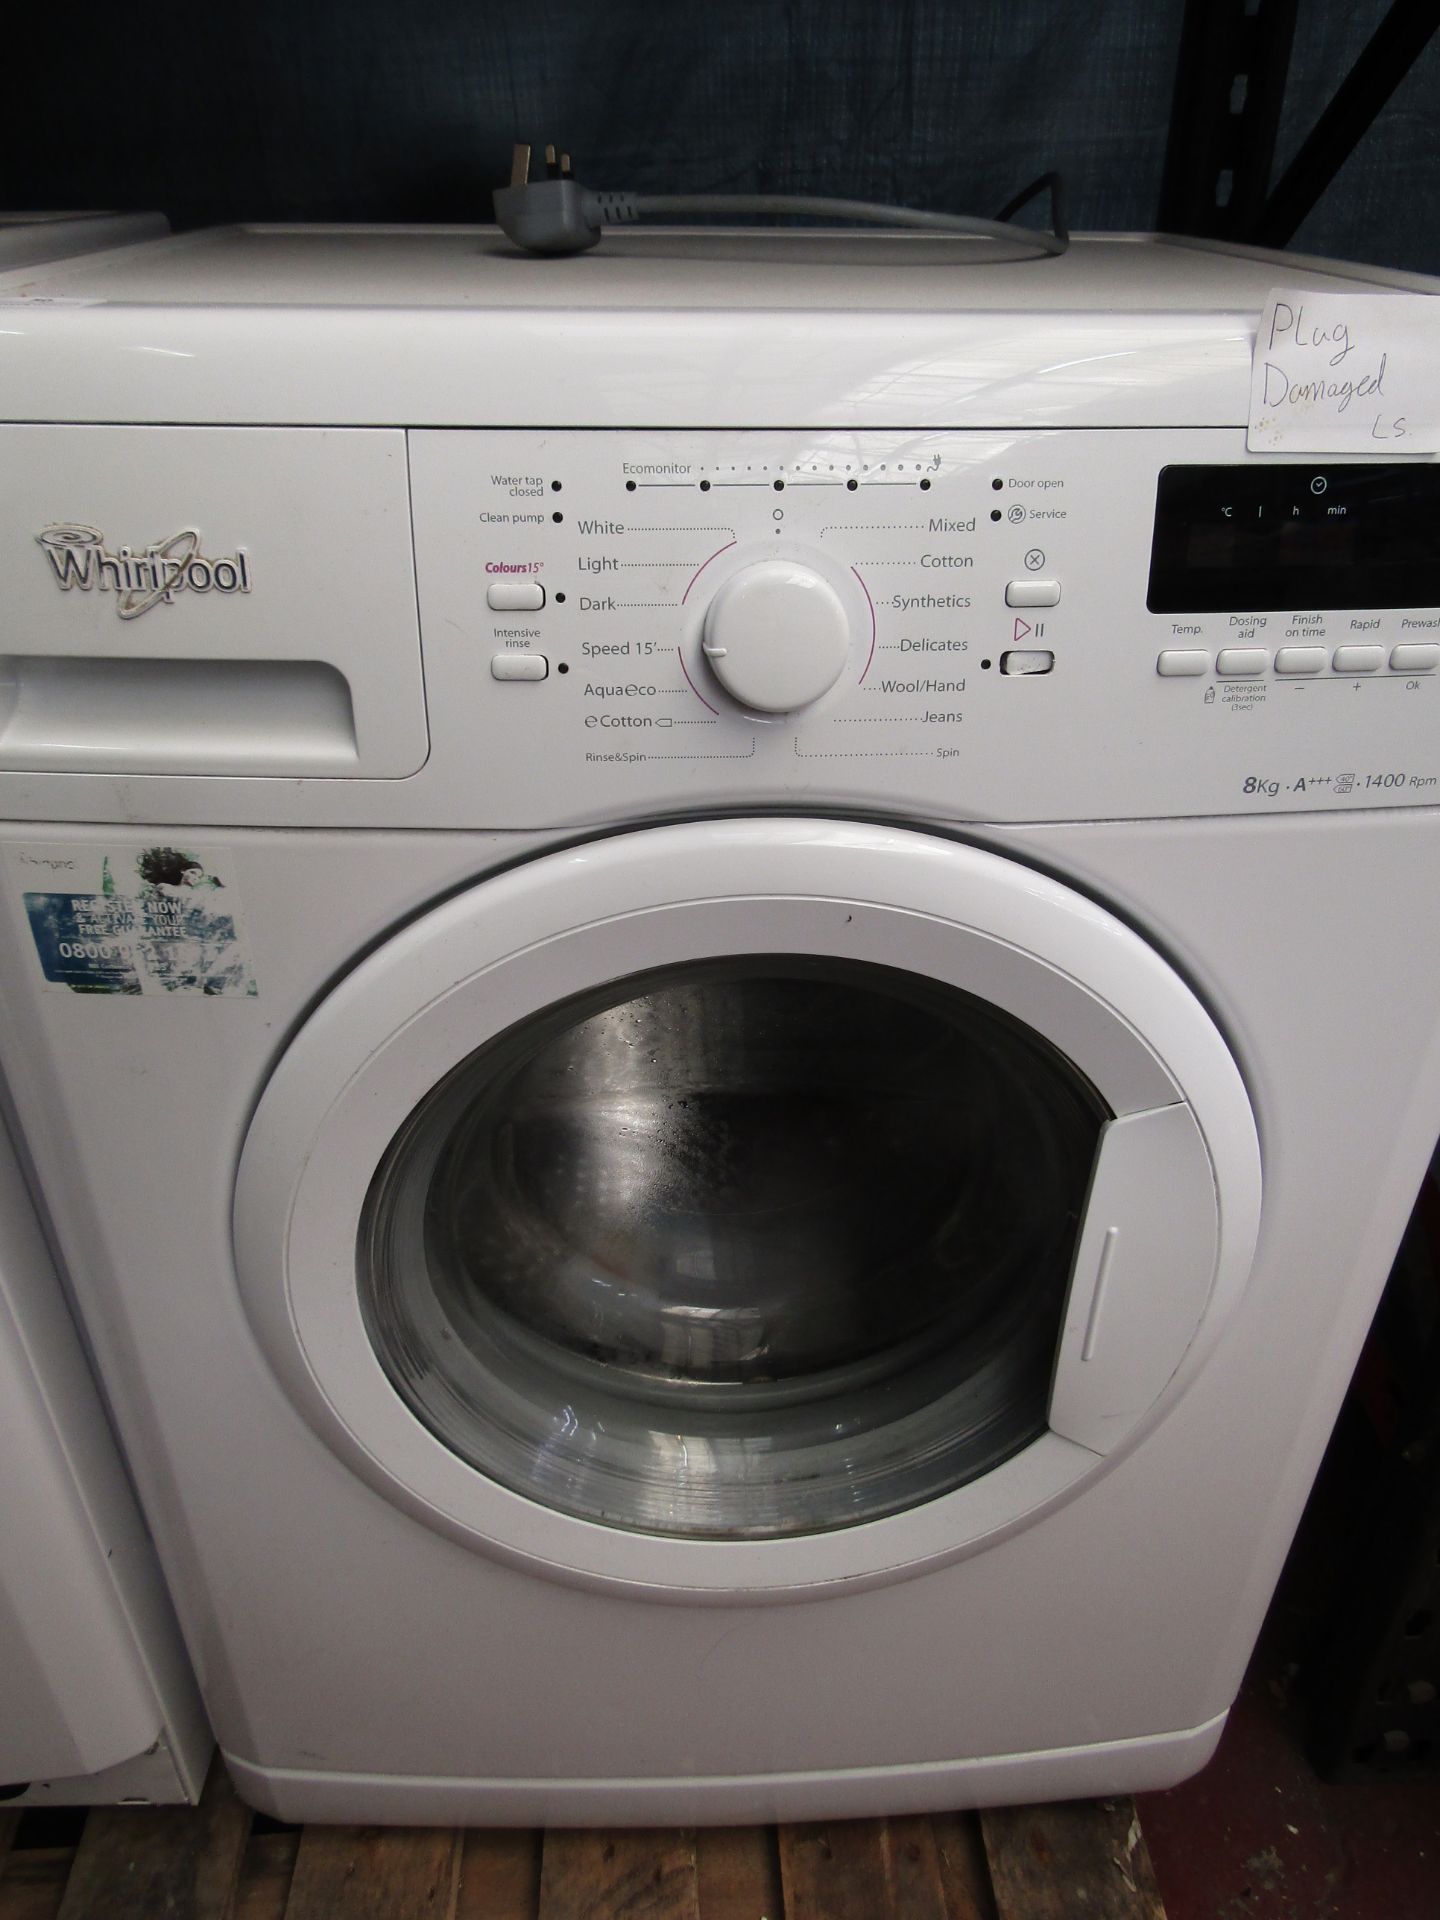 Whirlpool 6th sense colours washing machine, unable to test as has a damaged plug